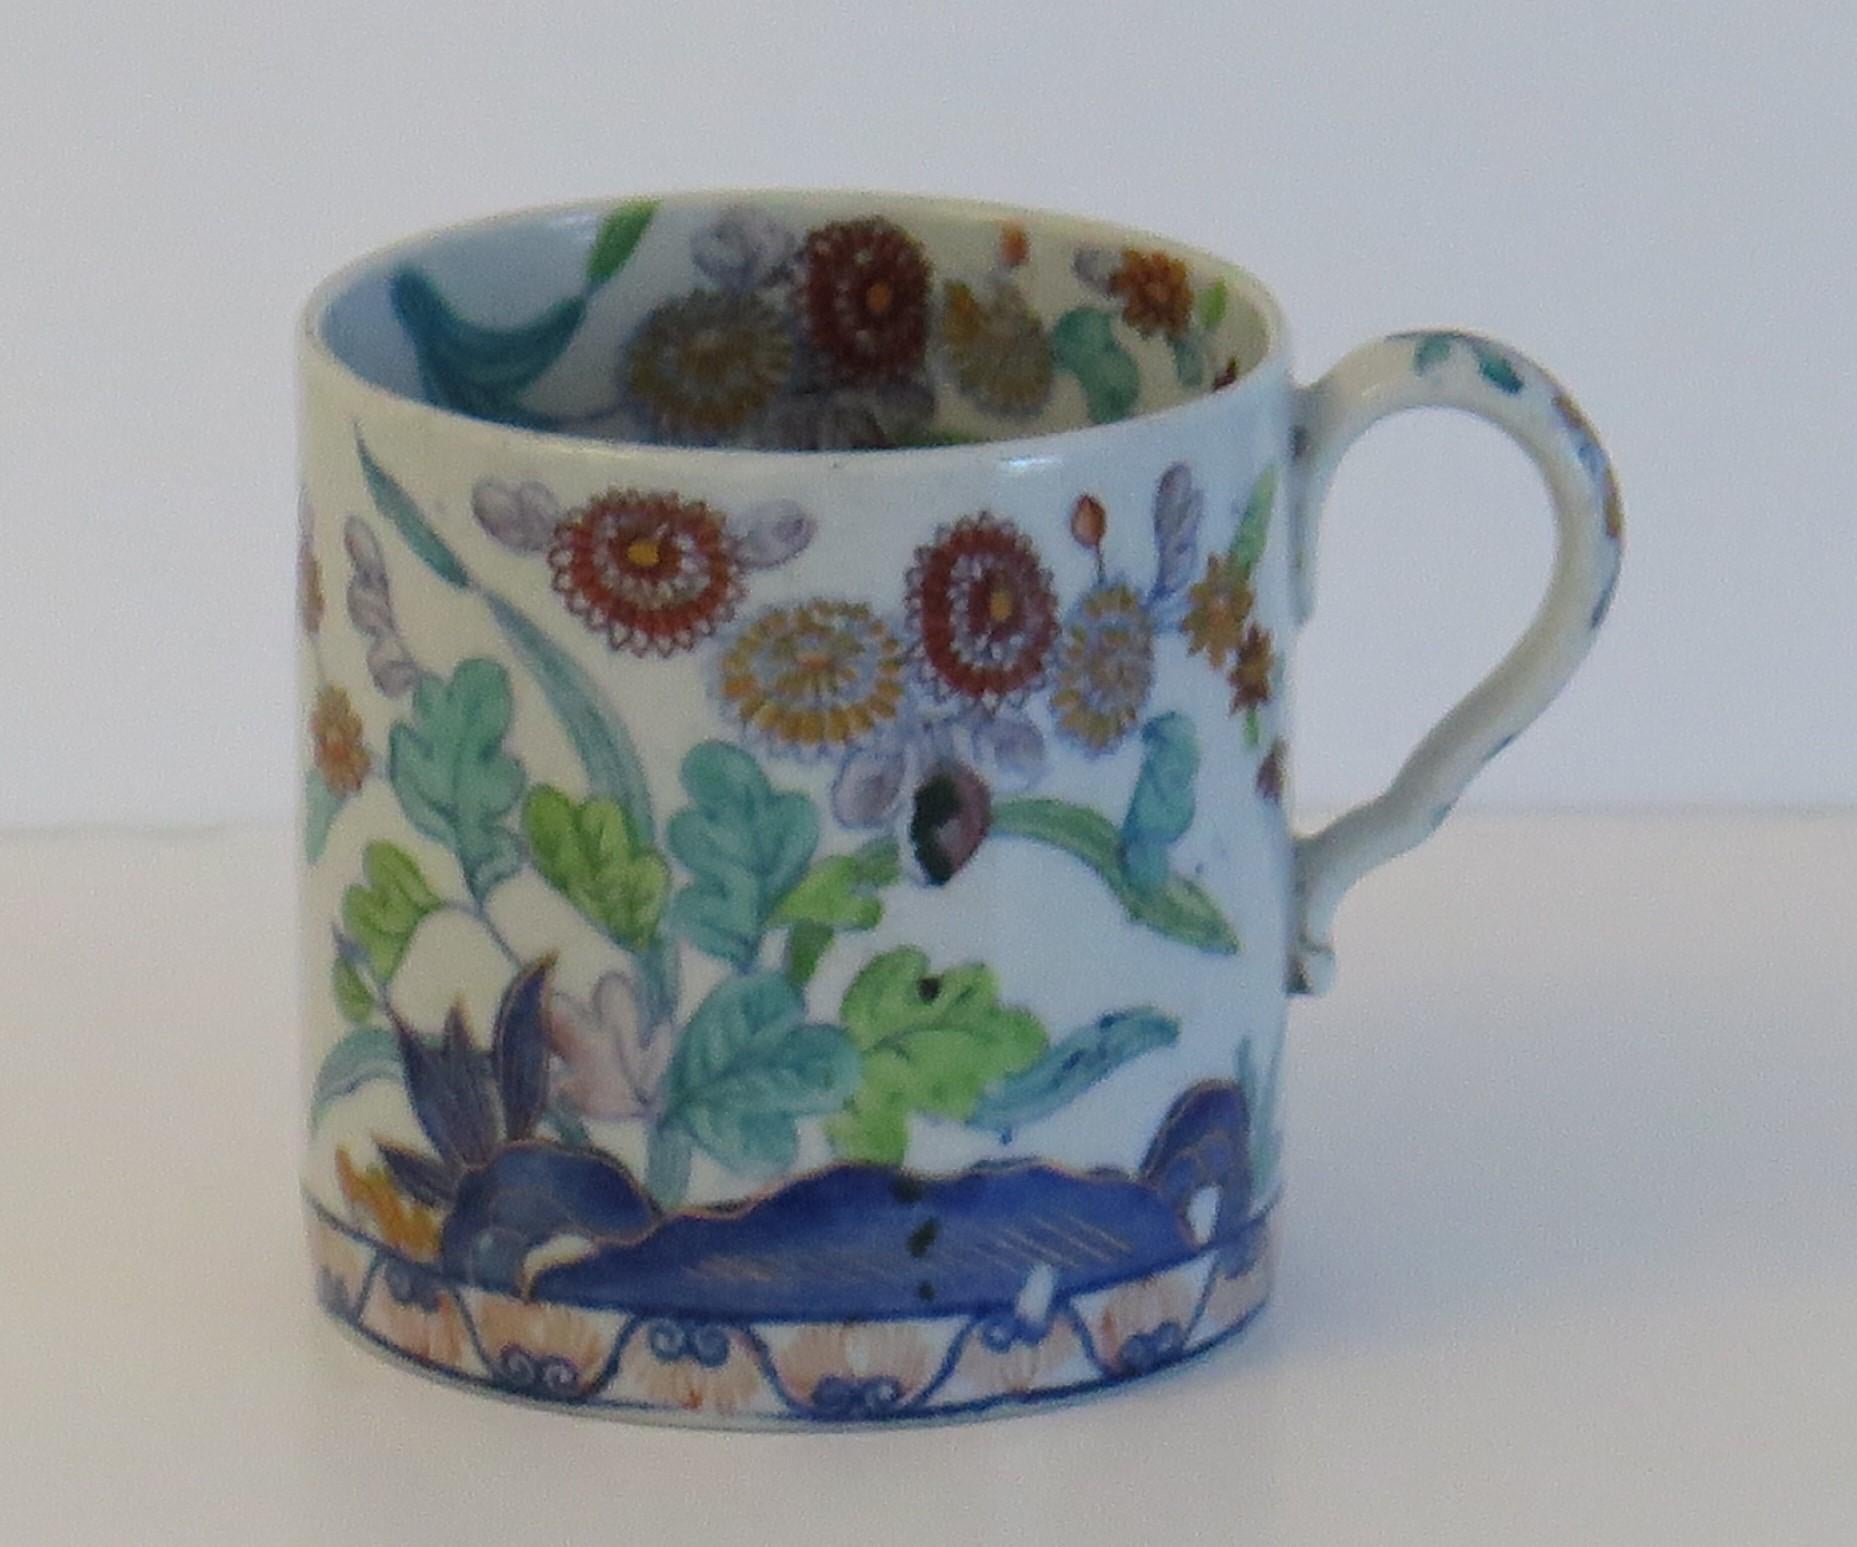 This is a good stone China (Ironstone) coffee can made by the SPODE factory in the early 19th Century, circa 1820.

The coffee can is well potted with cylindrical shape and a loop handle with the distinctive Spode kink to it. The piece is